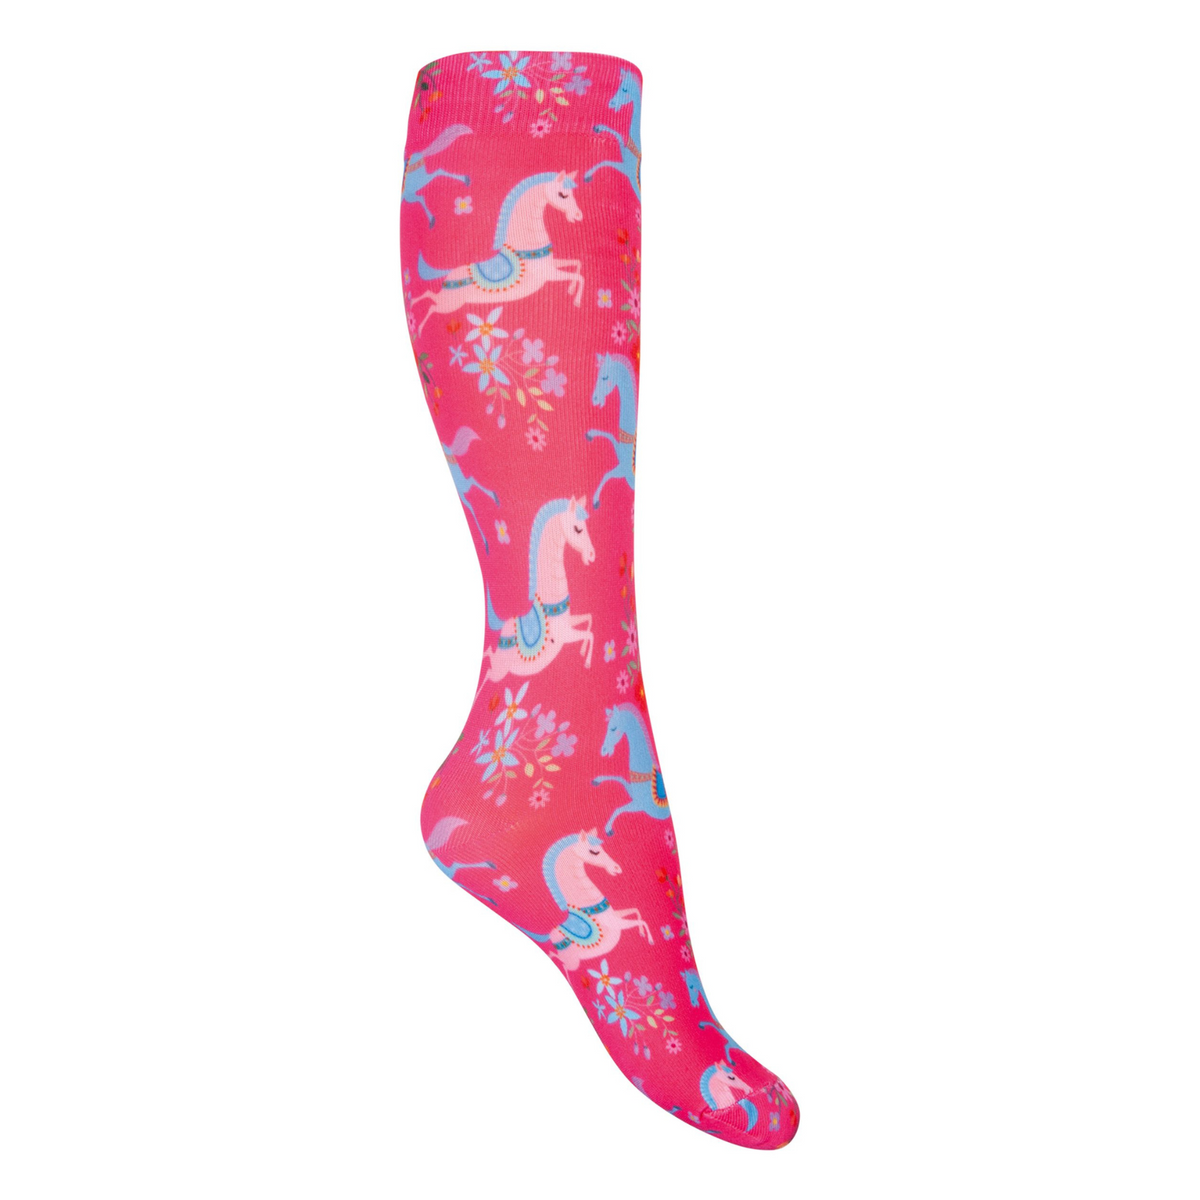 pink kids horse riding socks with blue ponies and flowers